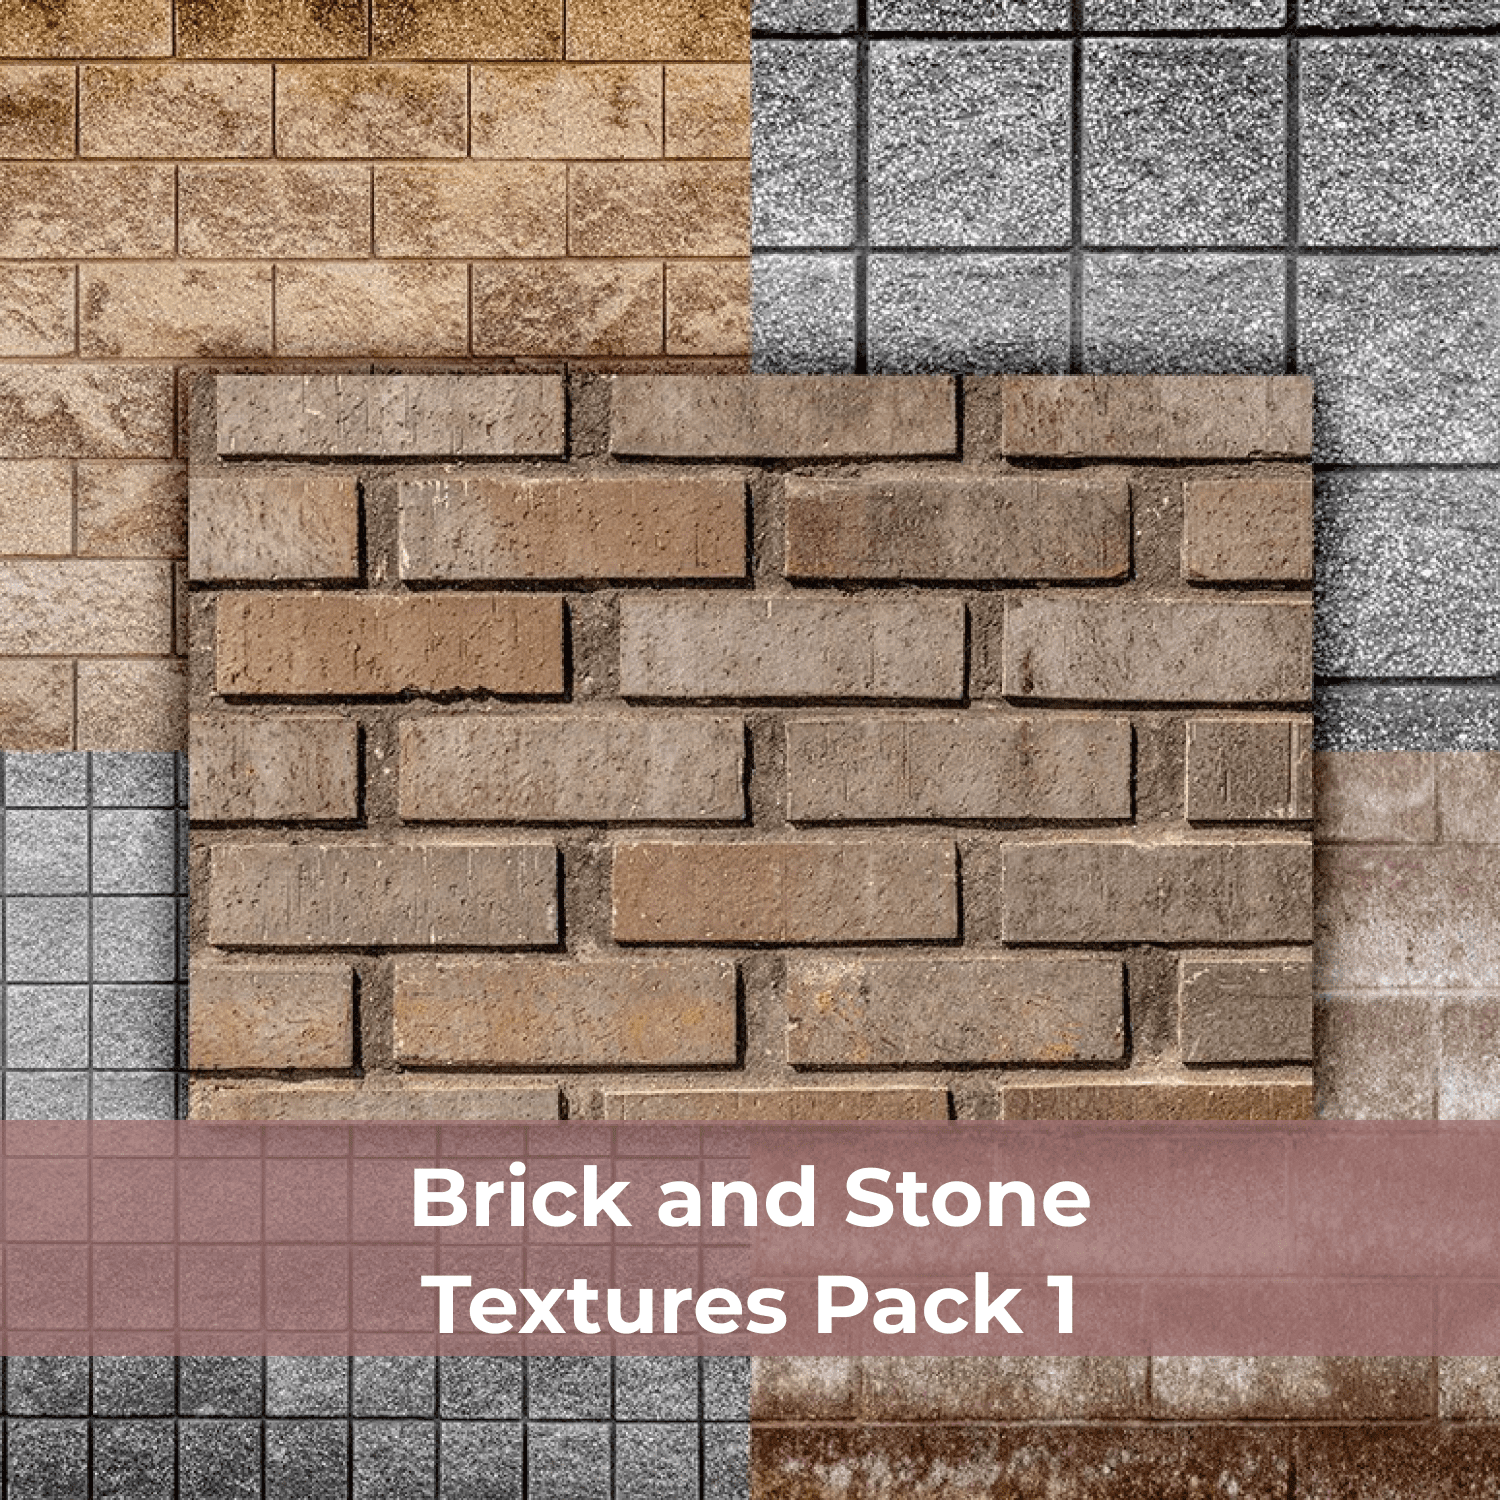 Brick and Stone Textures Pack 1 cover.